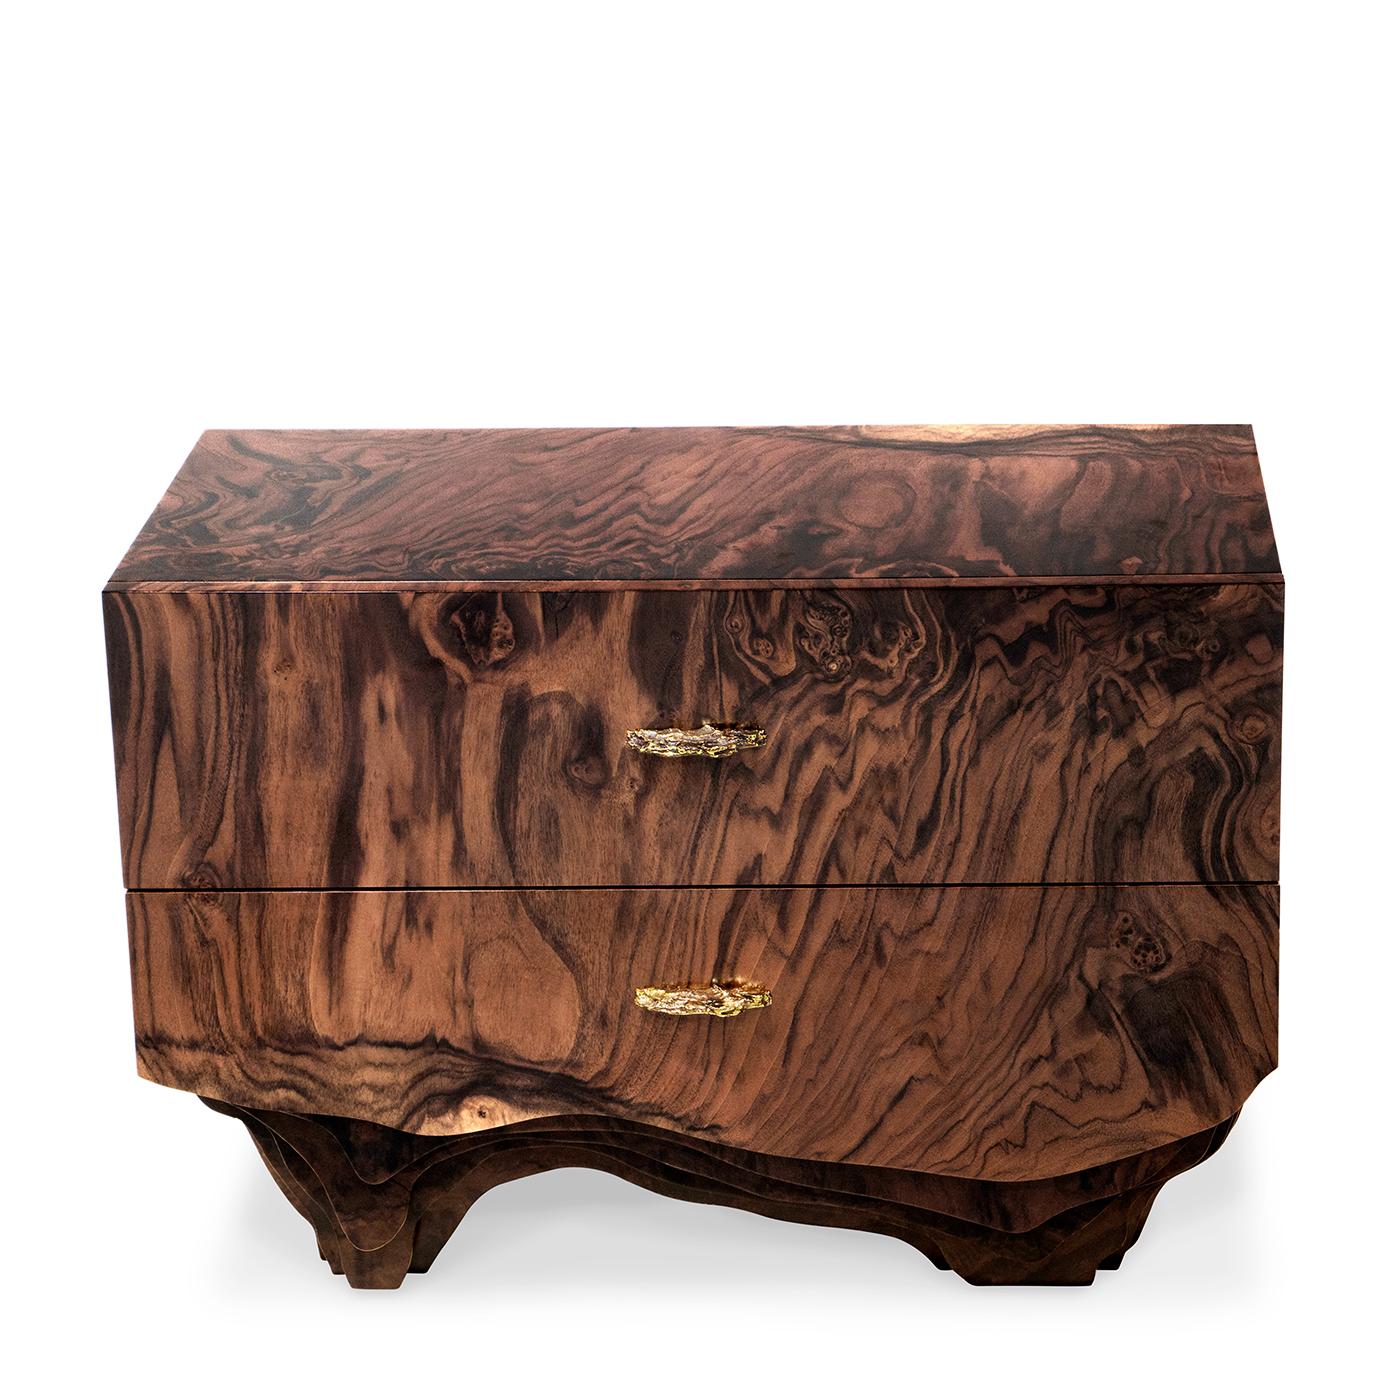 Tomer Nightstand with structure in veneered walnut and
with base in hand-hammered solid brass in vintage finish.
Handles in solid brass. Inside structure in veneered palisander 
wood in matte finish and with catsed solid brass decoration details.